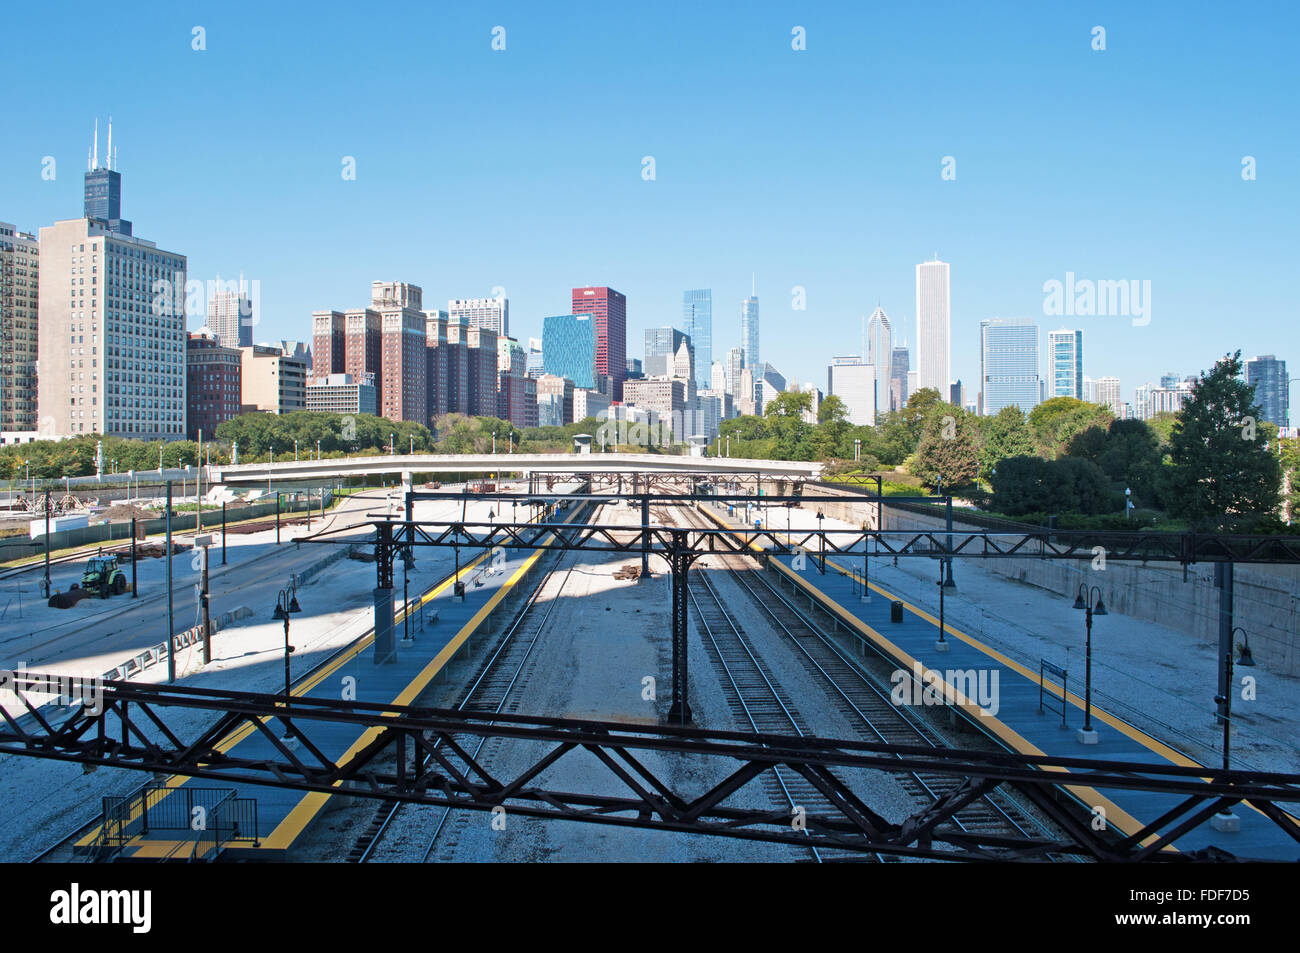 Chicago, Illinois, United States of America: skyline seen from railroad tracks Stock Photo